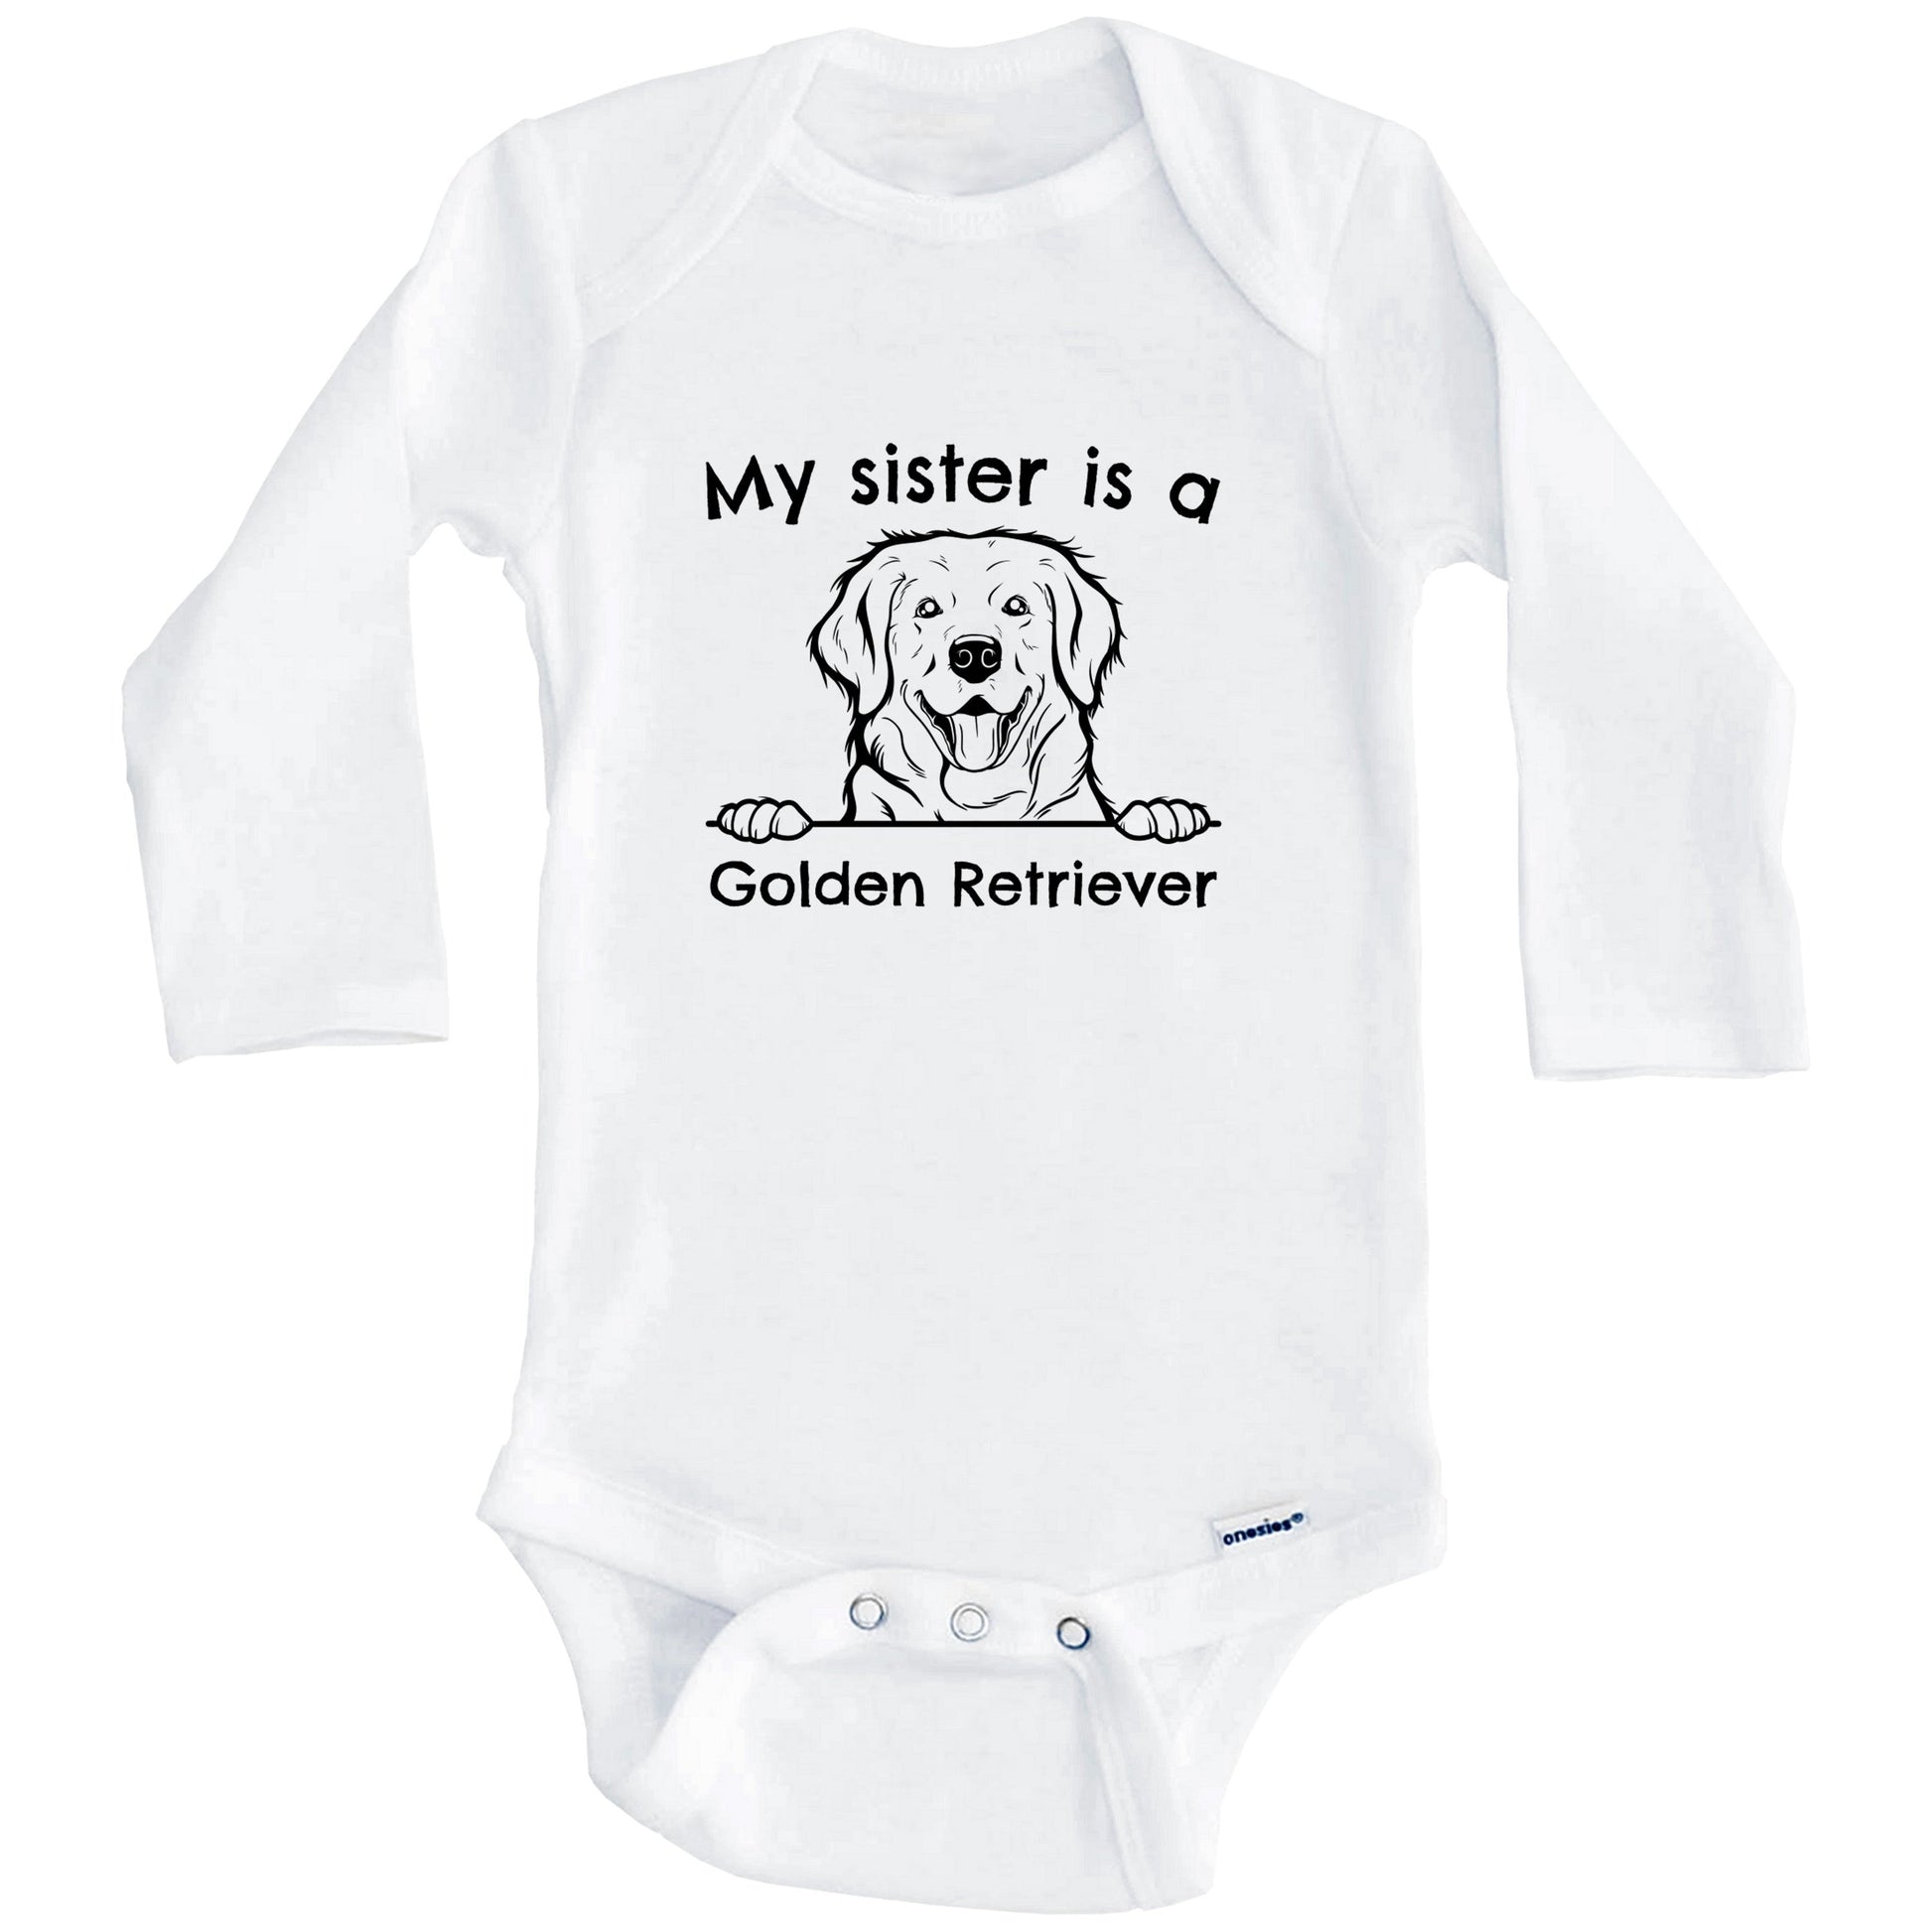 My Sister Is A Golden Retriever One Piece Baby Bodysuit (Long Sleeves)